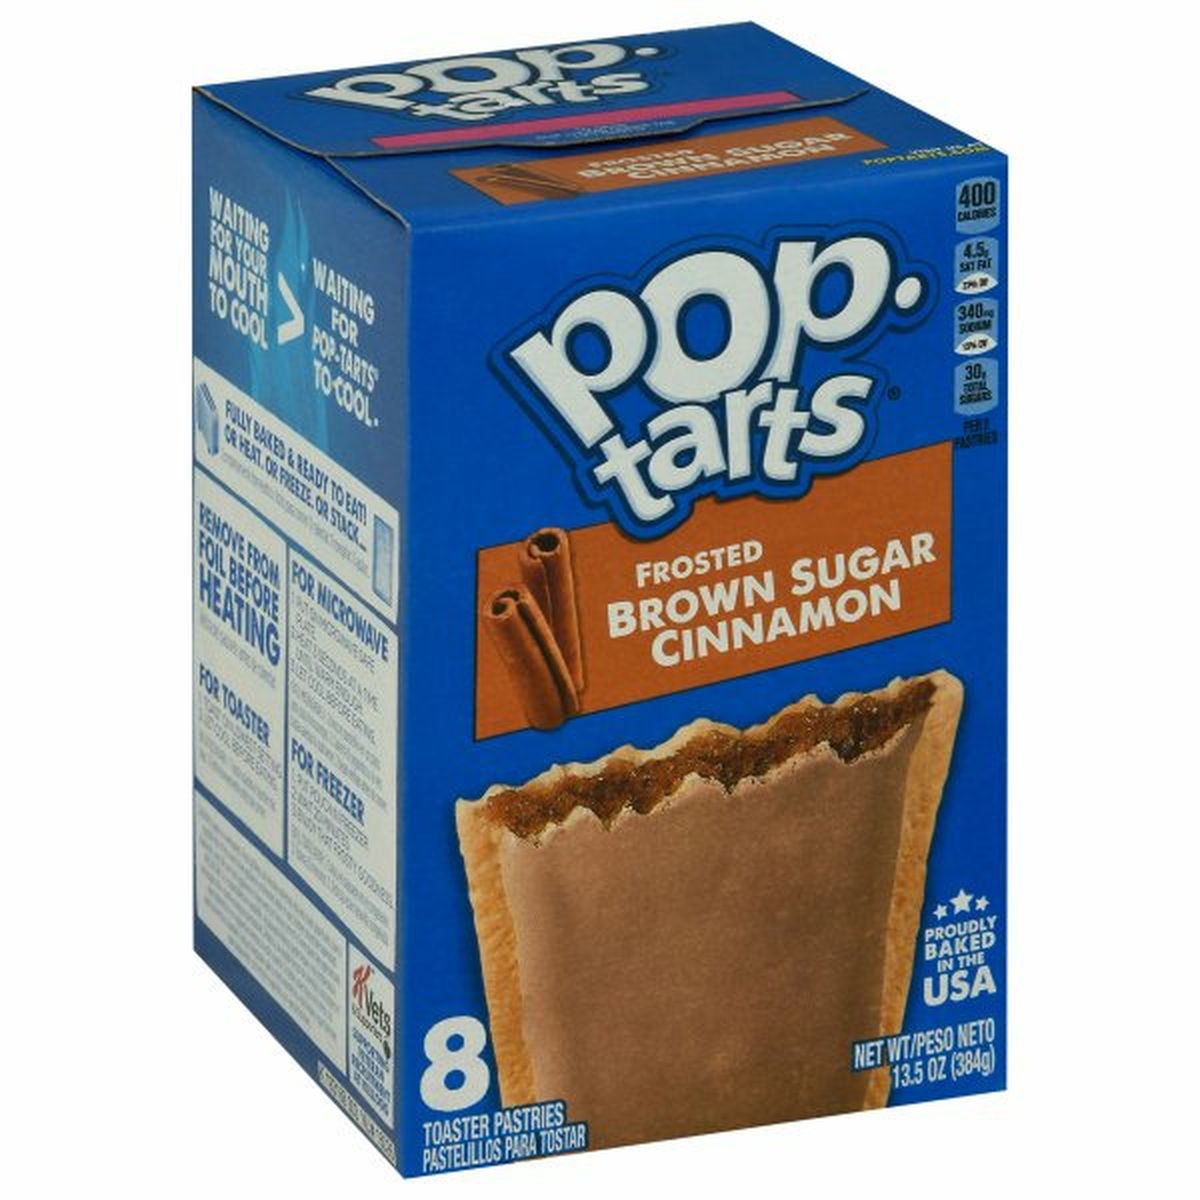 Calories in Kellogg's Pop-Tarts Toaster Pastries, Brown Sugar Cinnamon, Frosted, 8 Pack